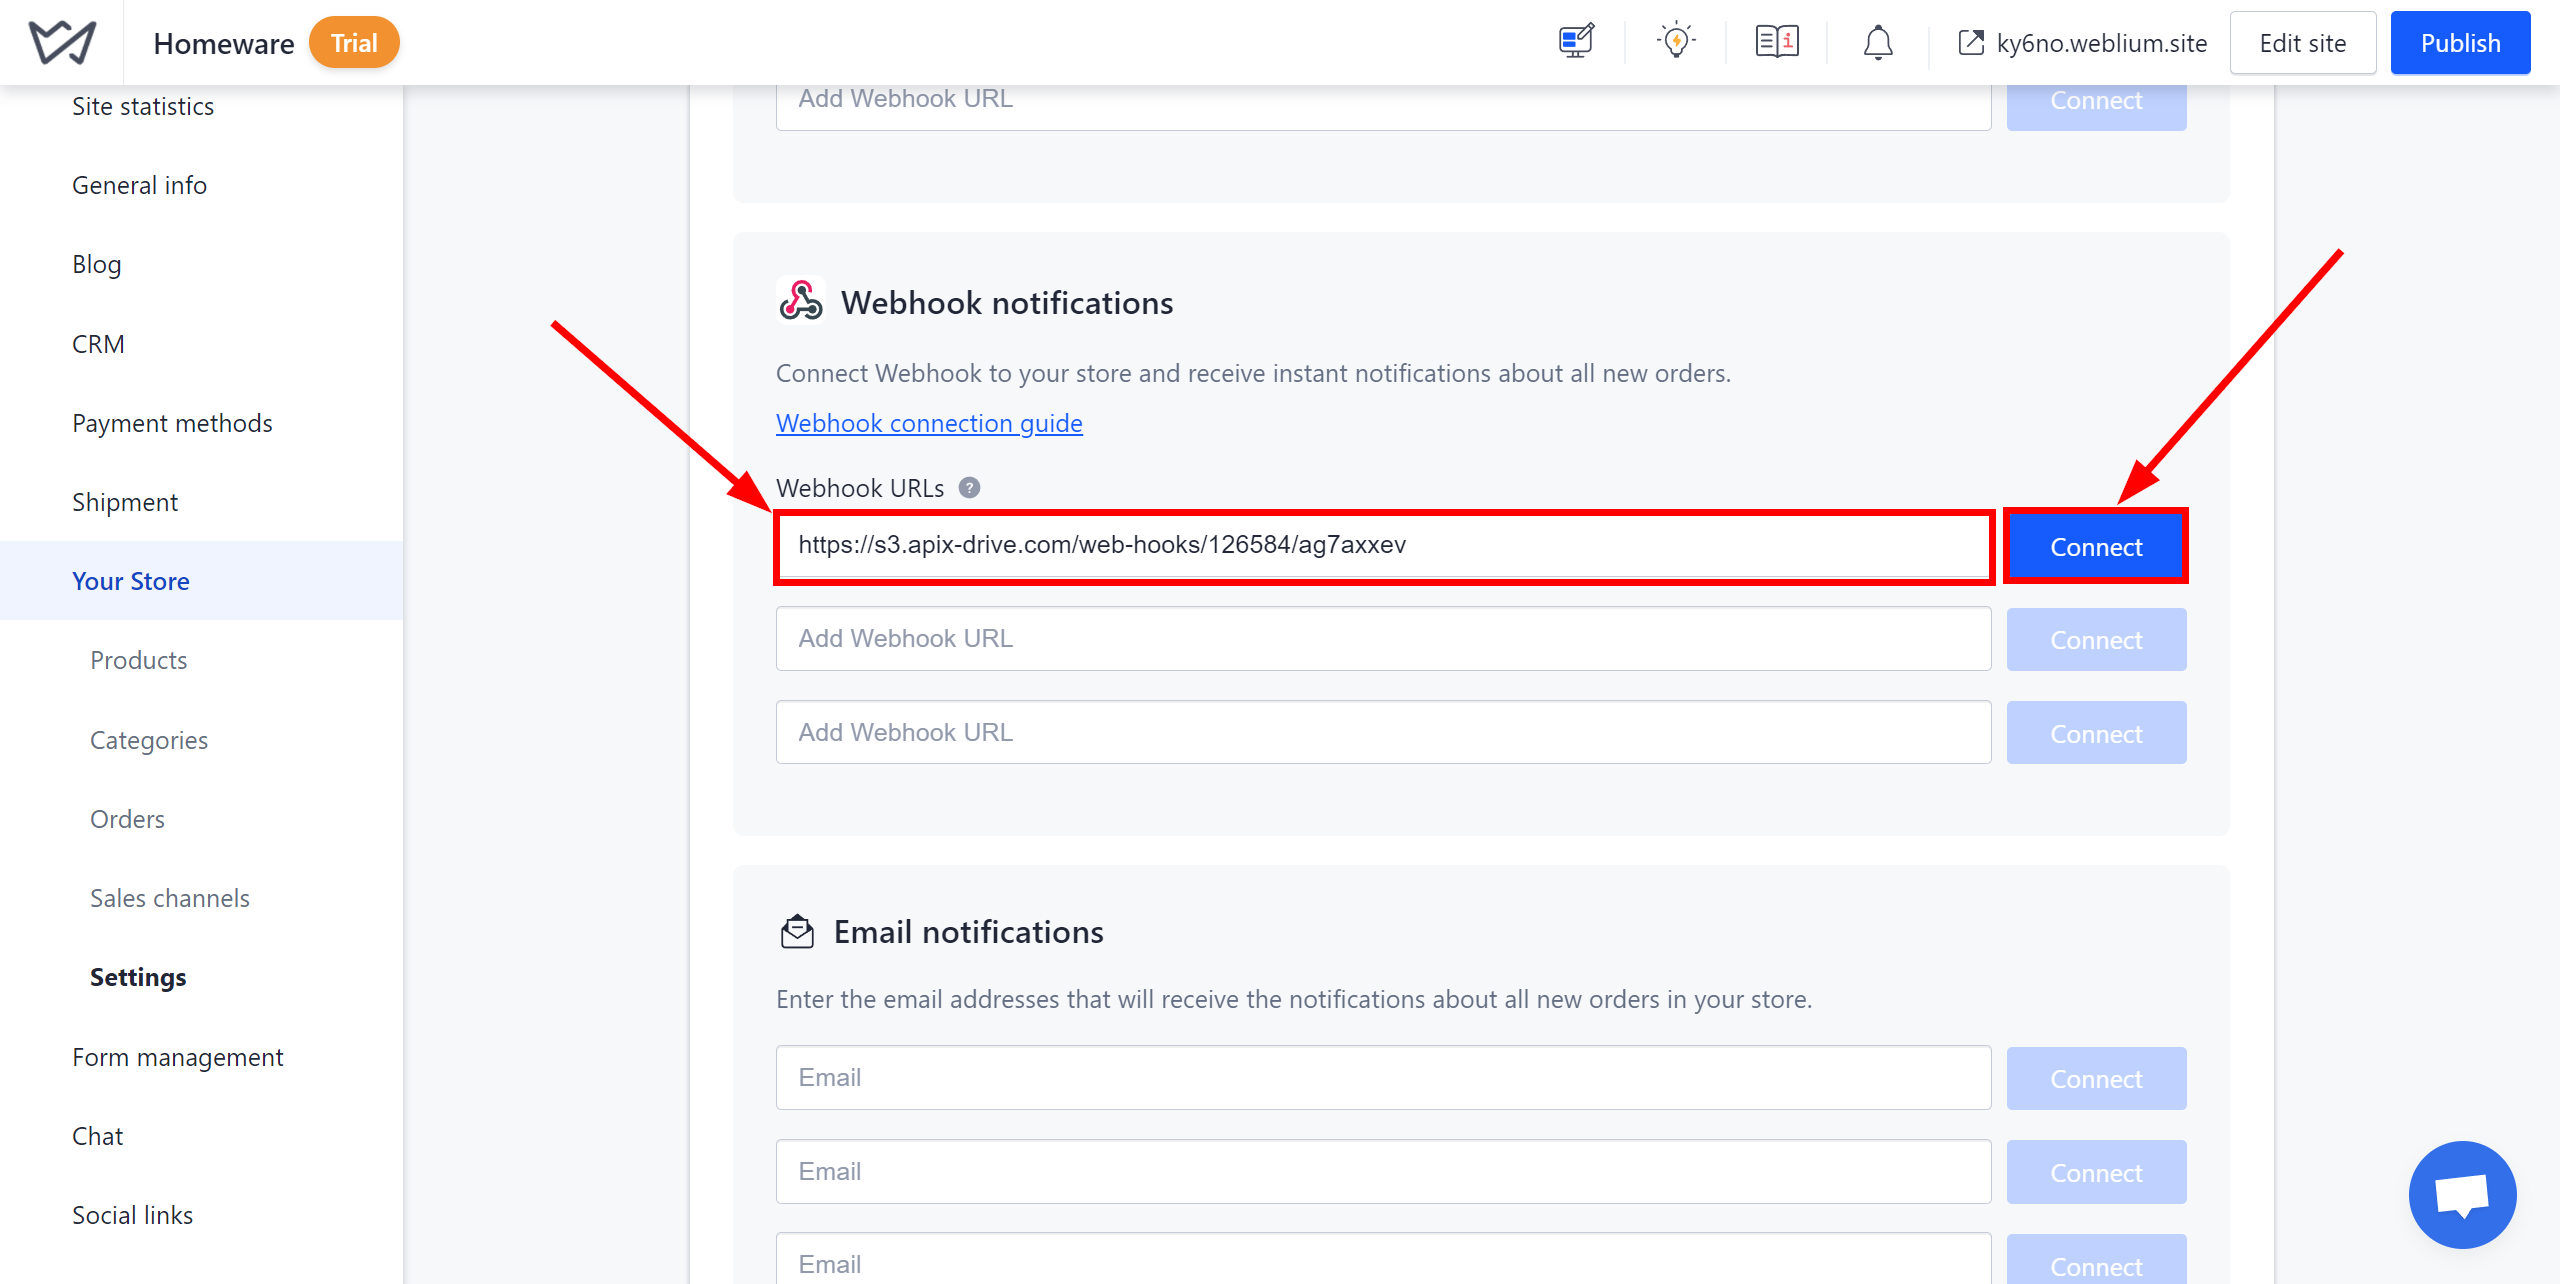 How to Connect Weblium as Data Source | Webhook setting